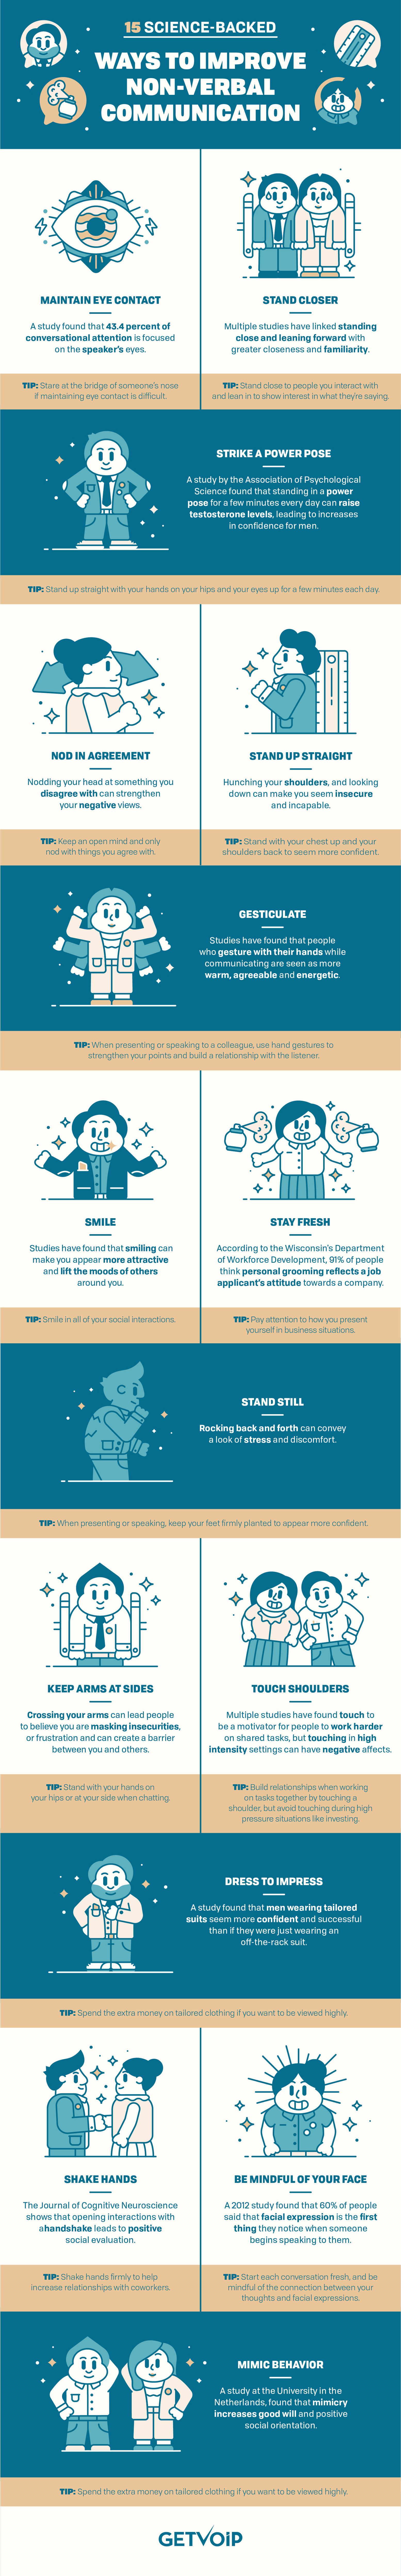 How to Advance Non-Verbal Communication Skills: 15 Science-Backed Methods - Infographic